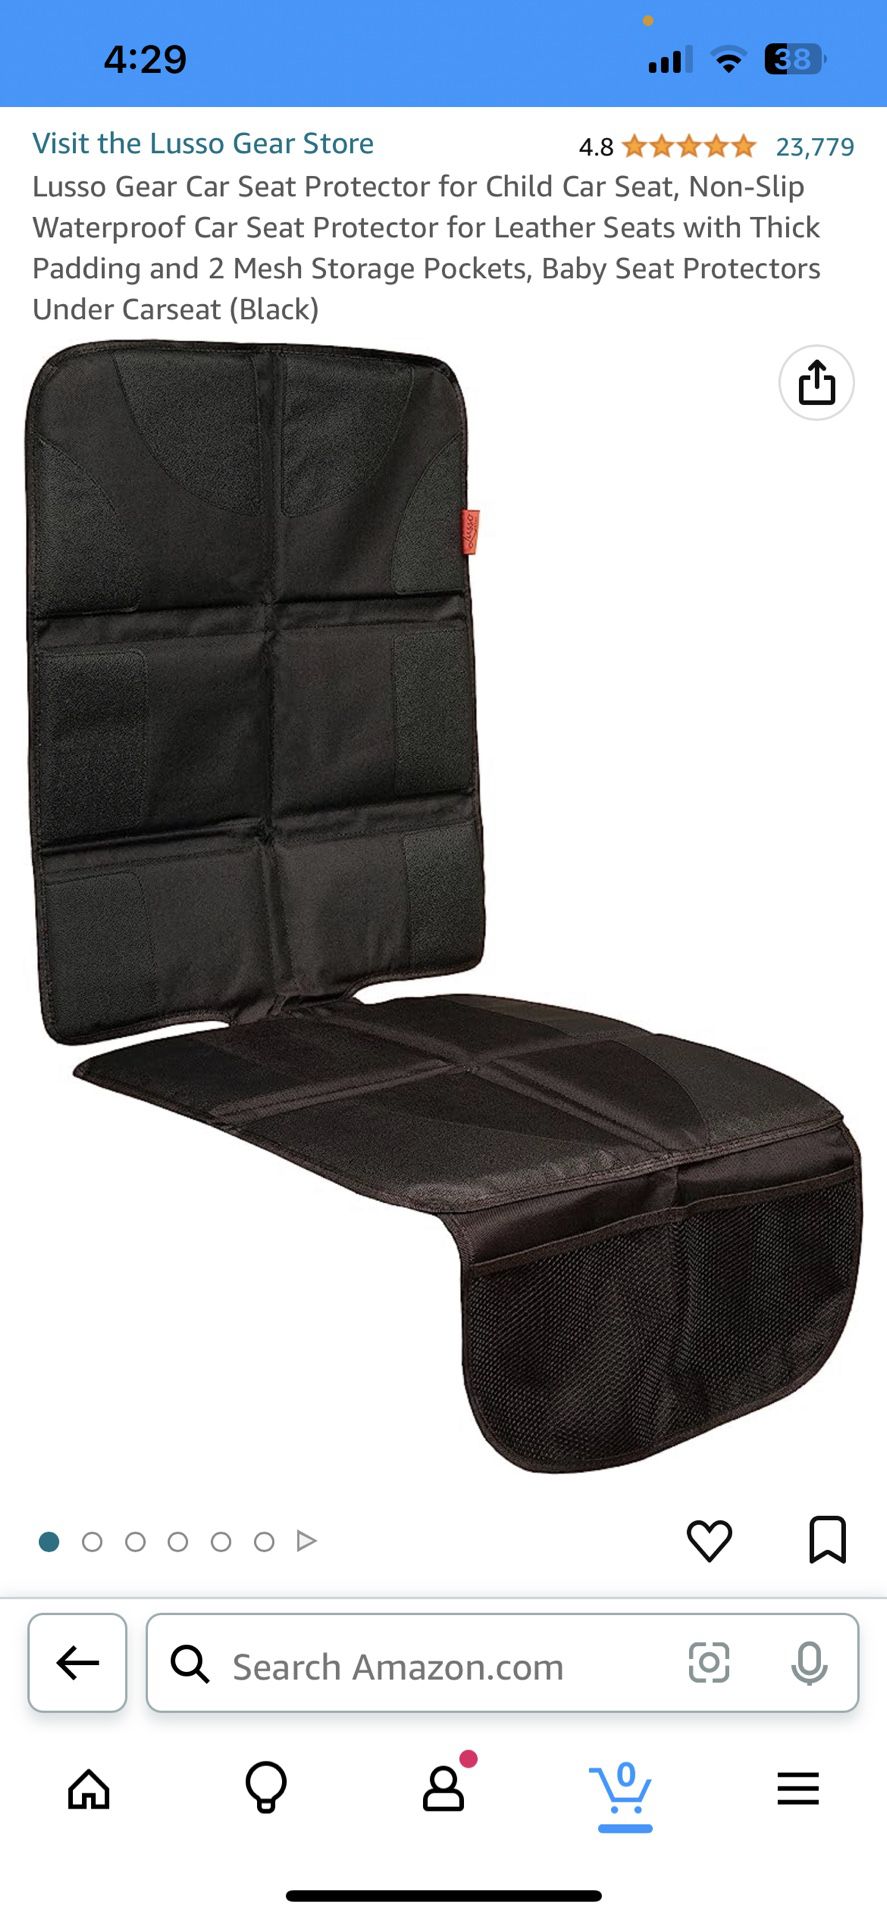 Lusso Car Seat Protector- Brand New for Sale in Spanish Springs, NV  OfferUp